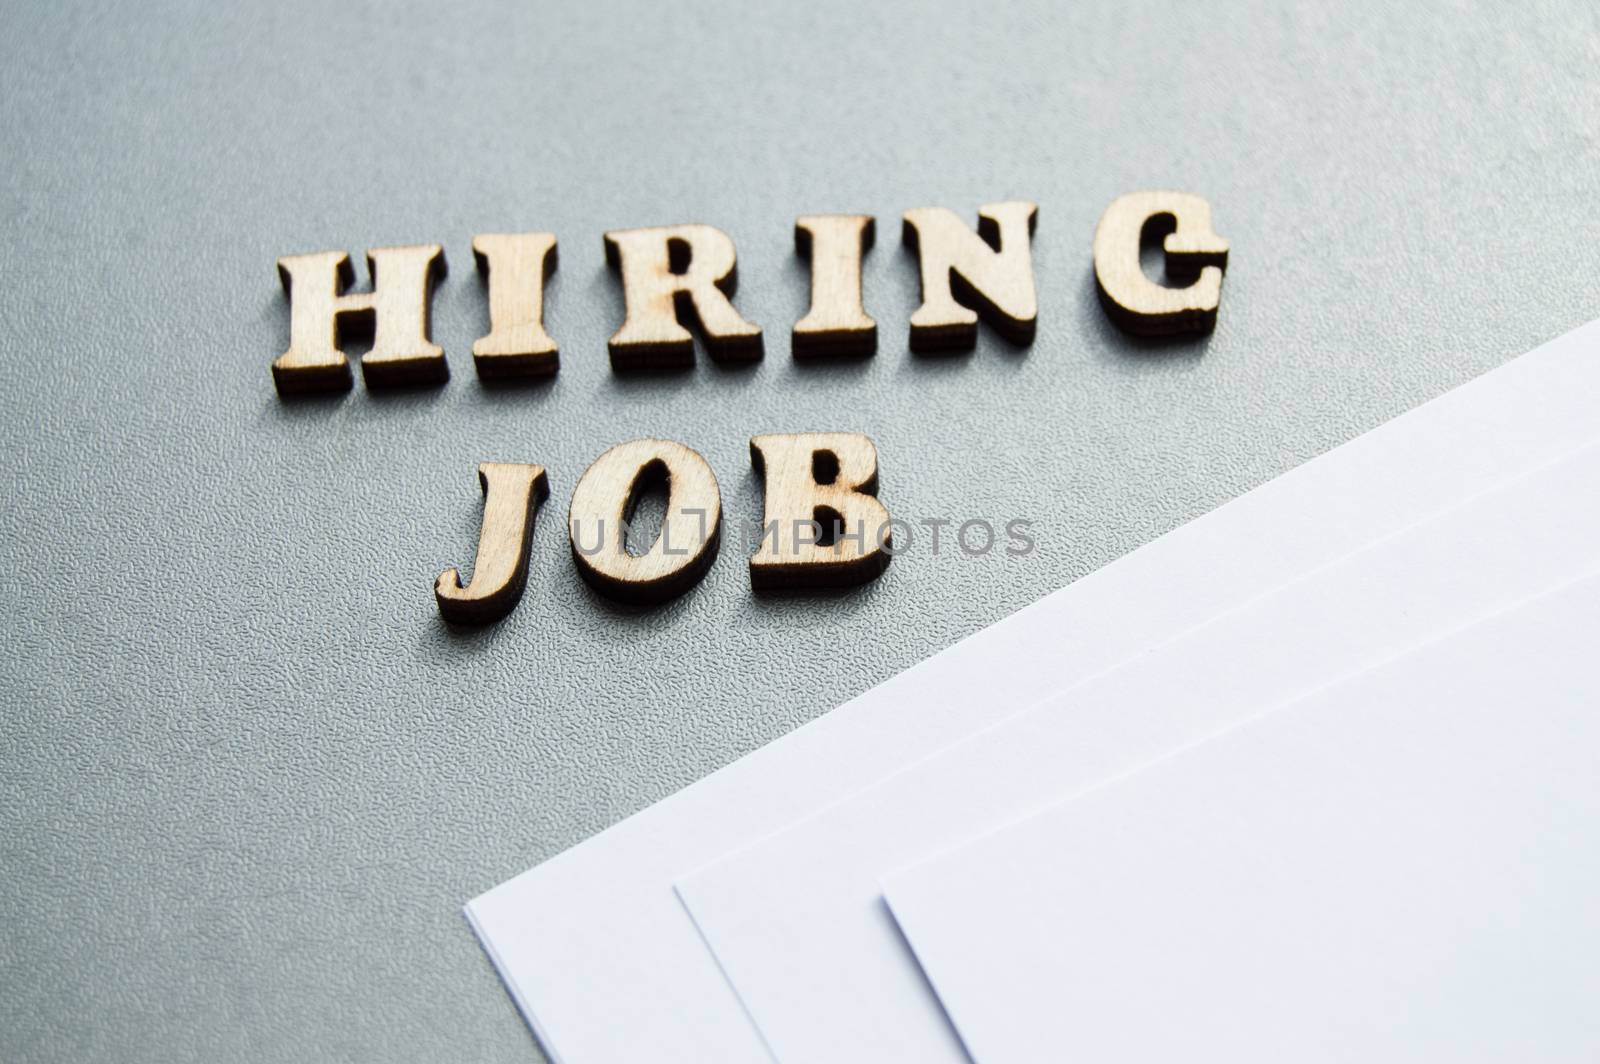 Hiring JOB is written in wooden letters on a gray background, near white sheets of paper, layout for design, ad layout, hiring concept.